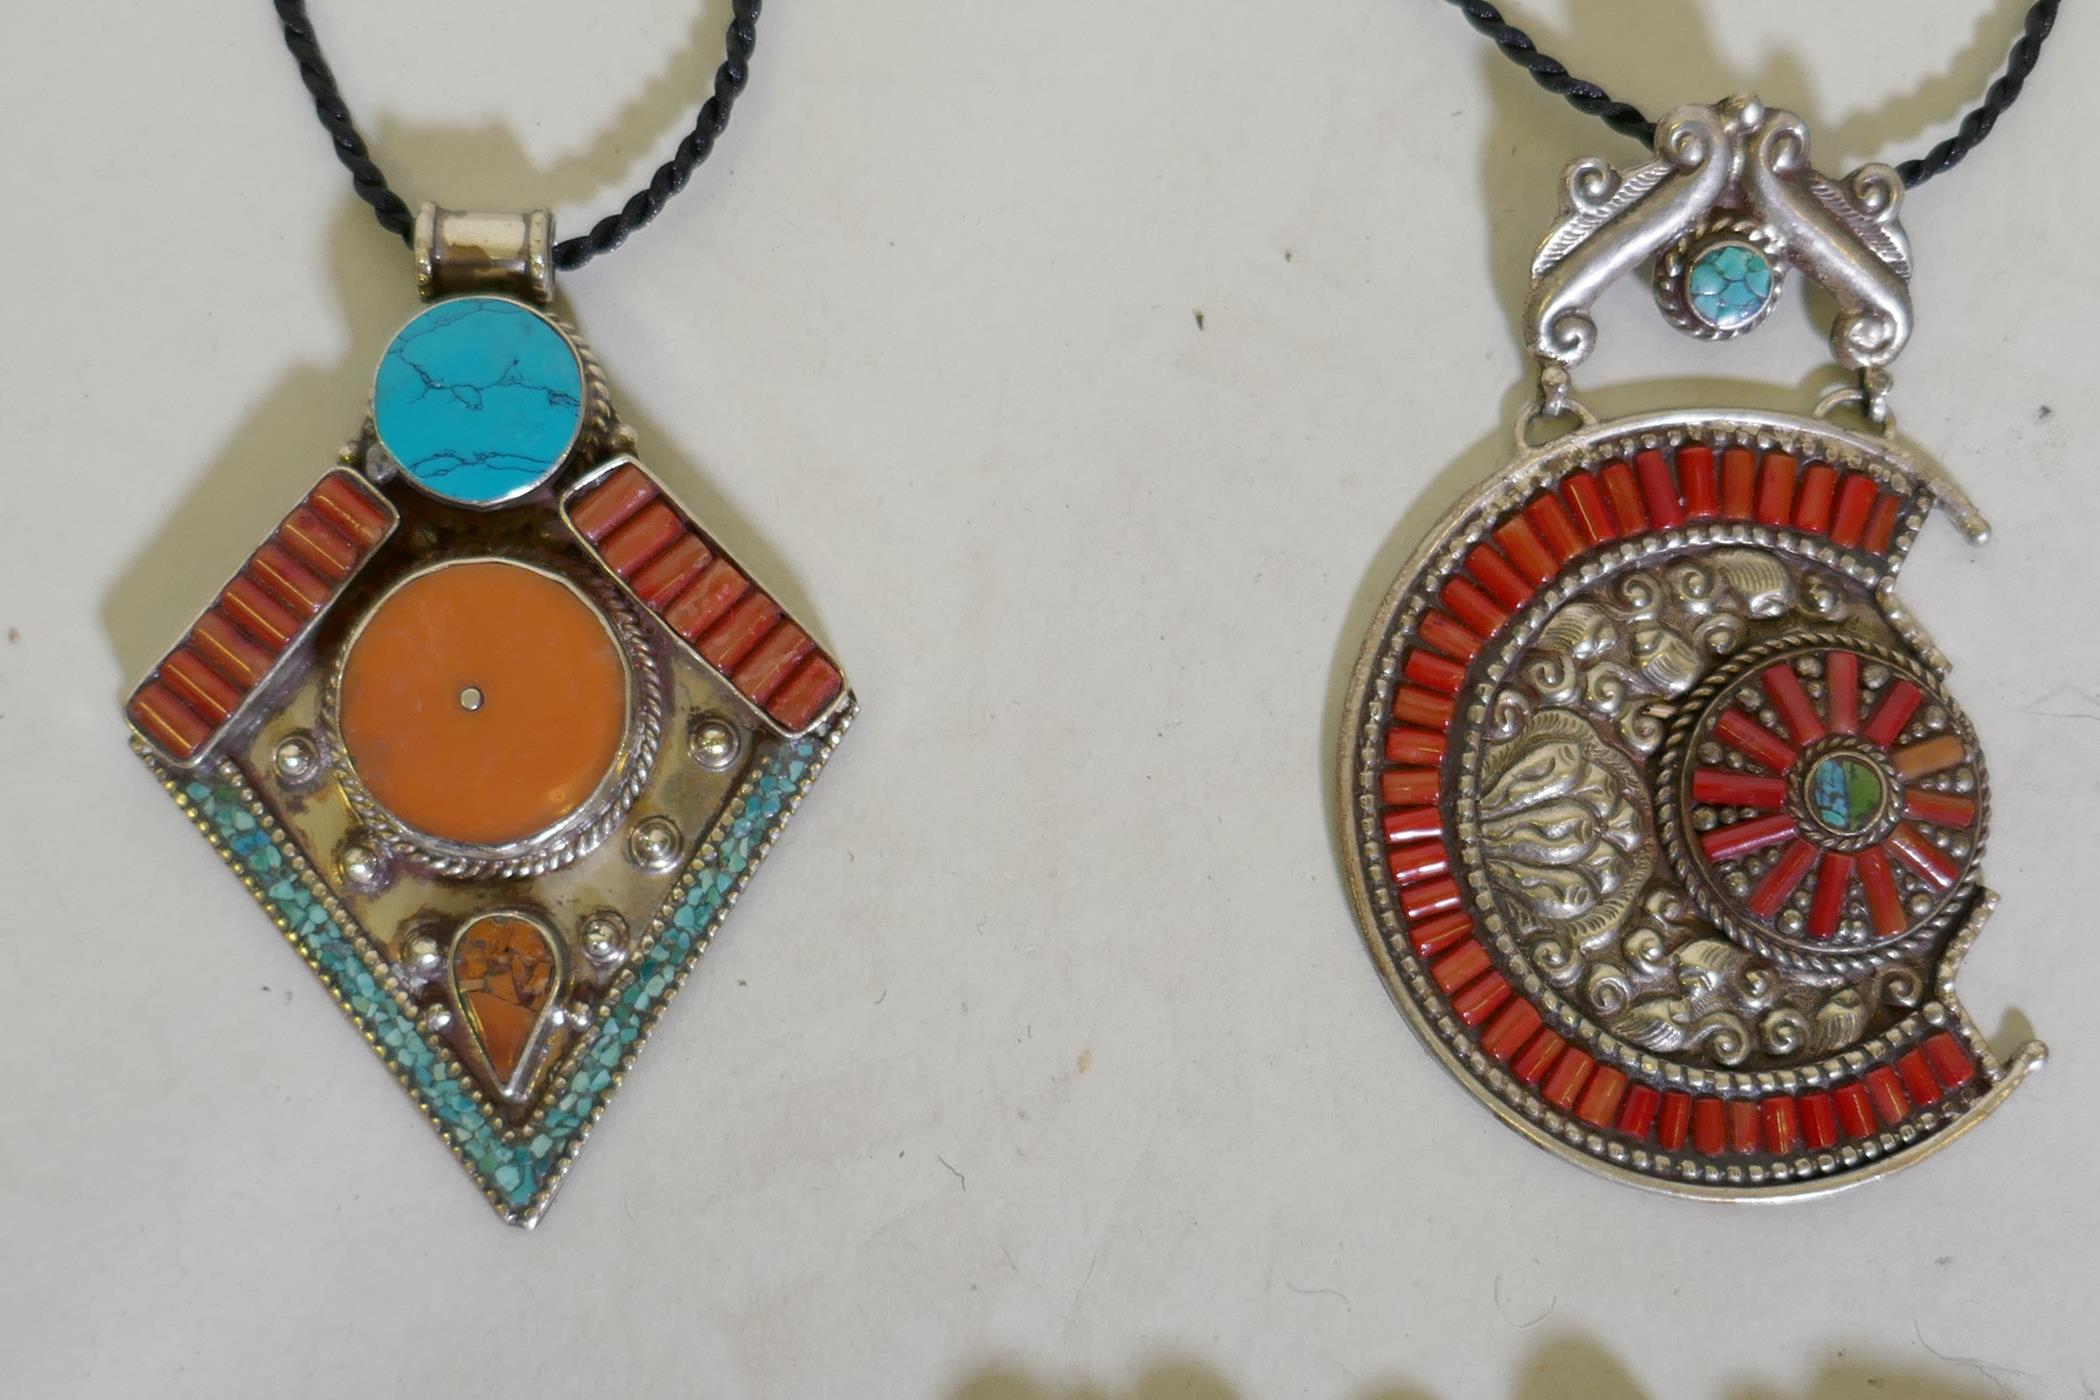 Four white metal pendants inset with coral and turquoise mosaic beads, 7cm long, and a bead necklace - Image 3 of 6